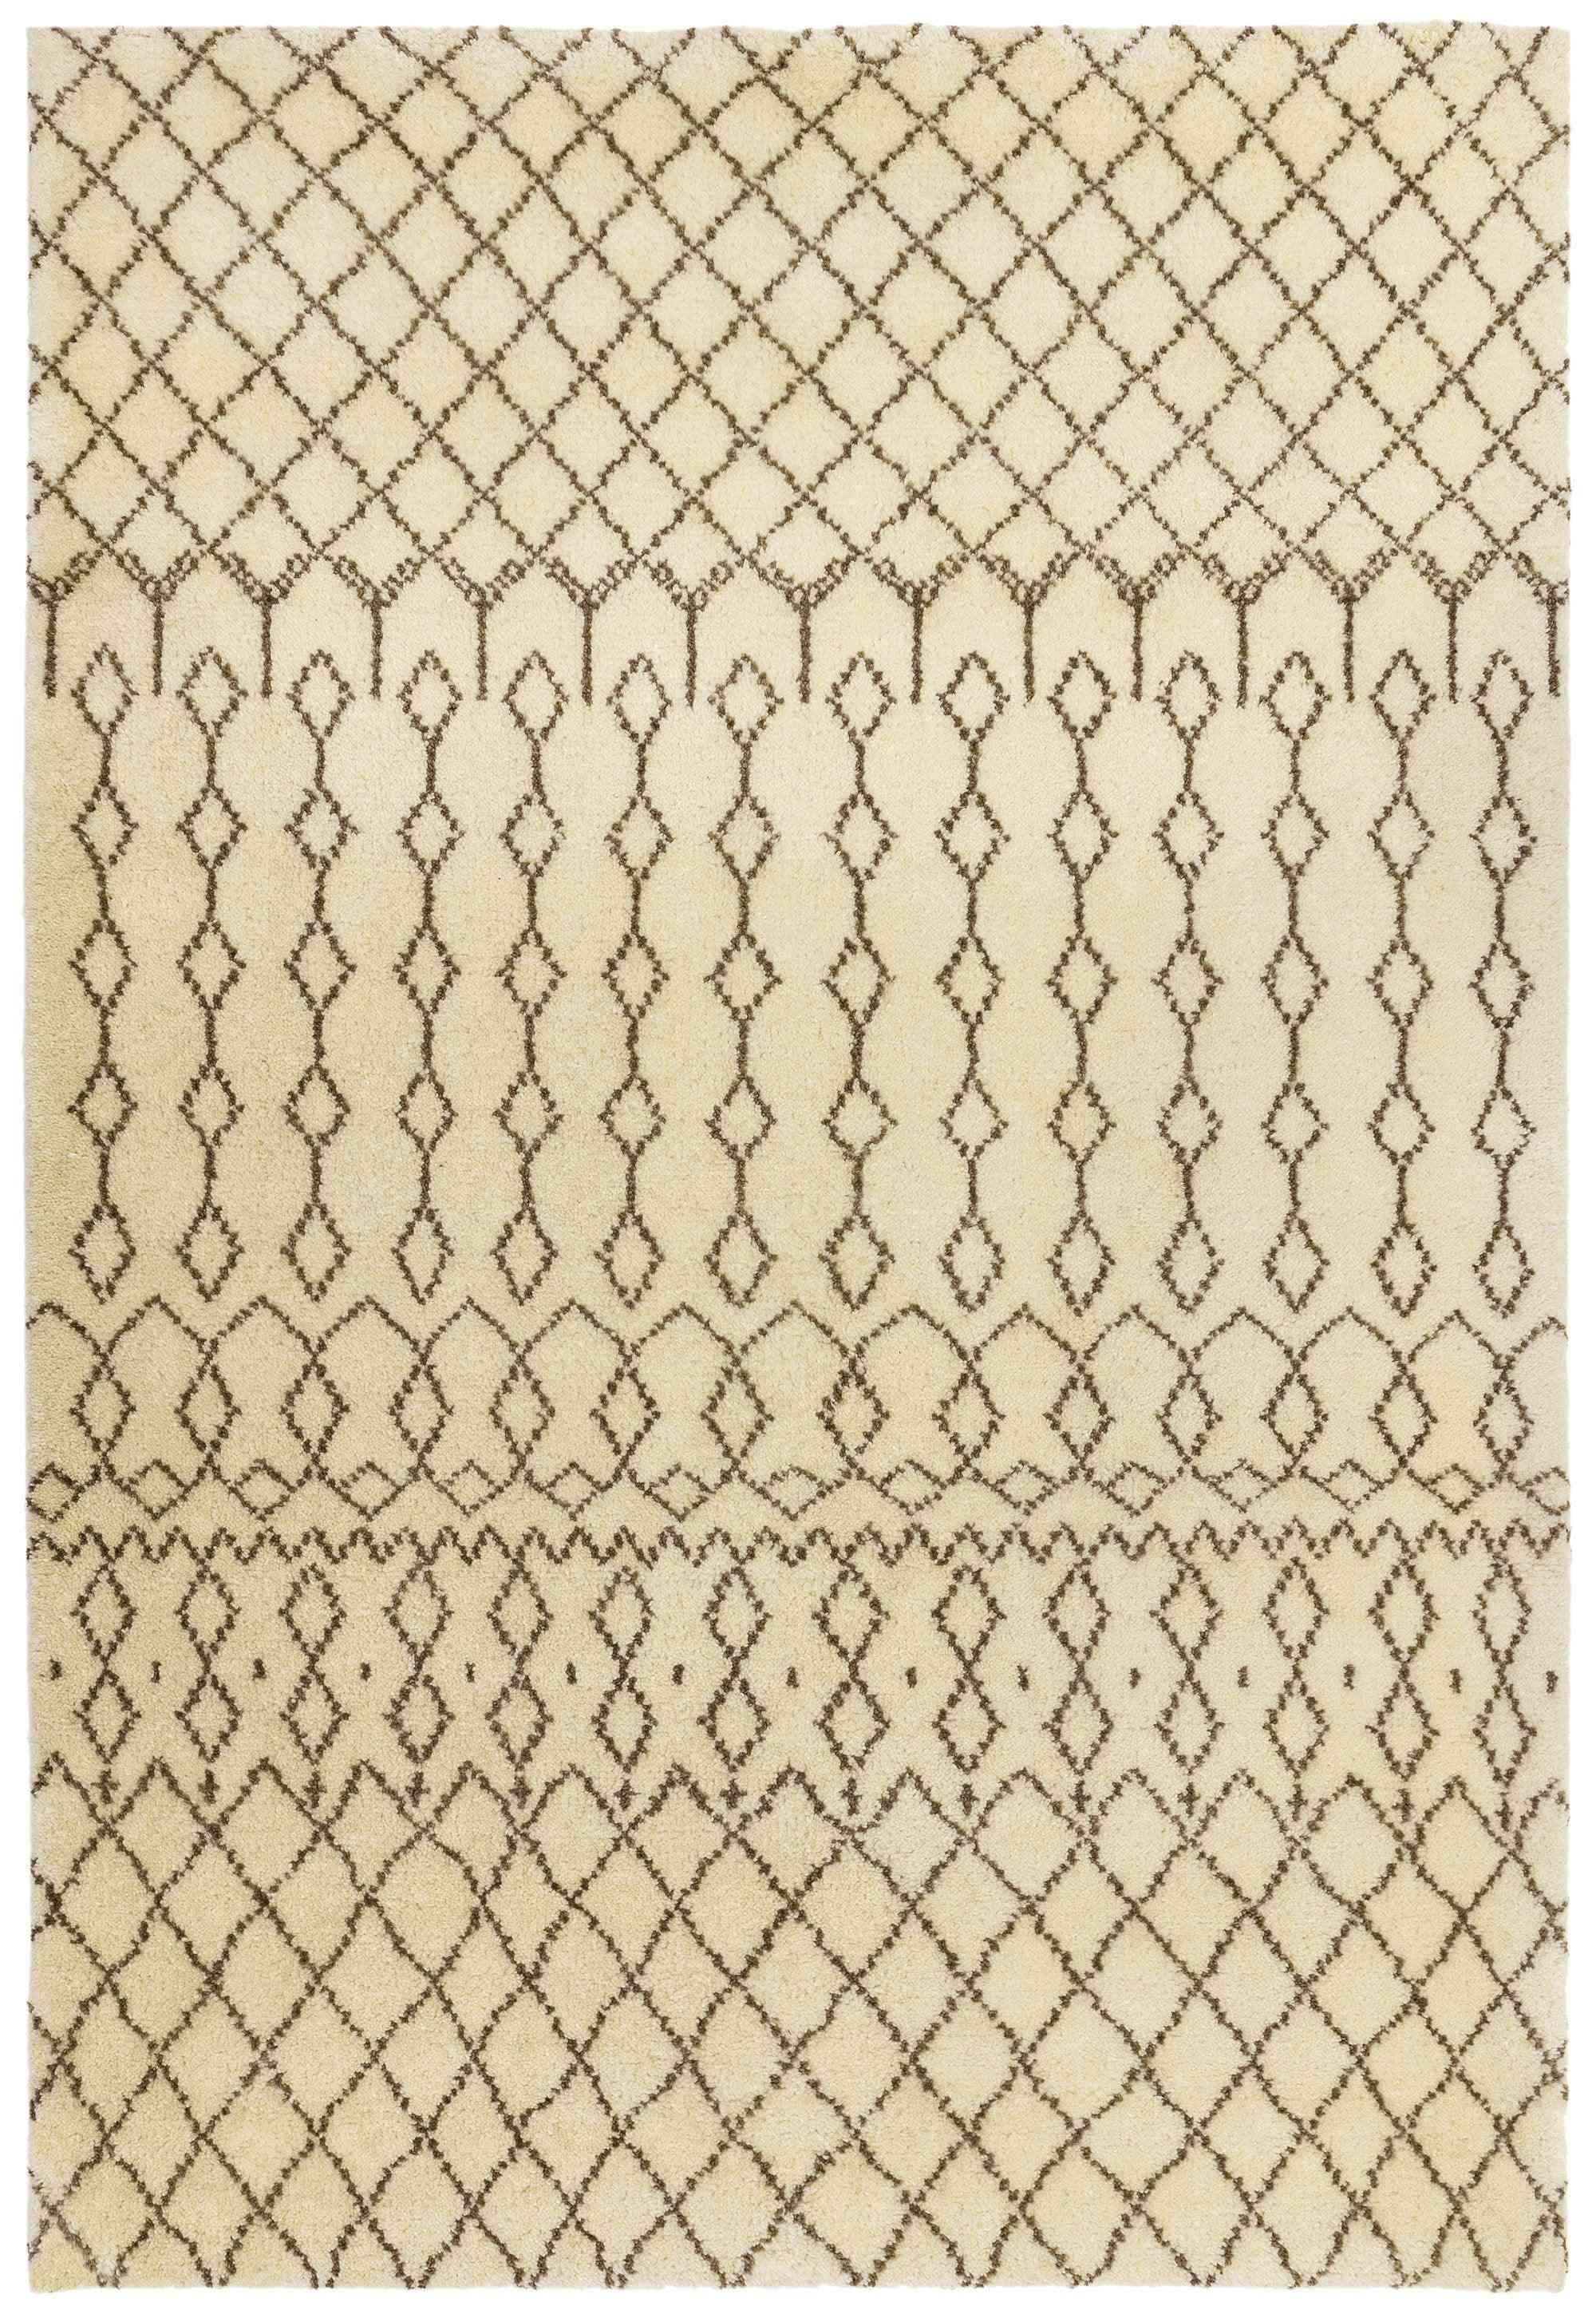 Amira003 Hand knotted Moroccan Berber Wool Tribal Rug - Rugmaster